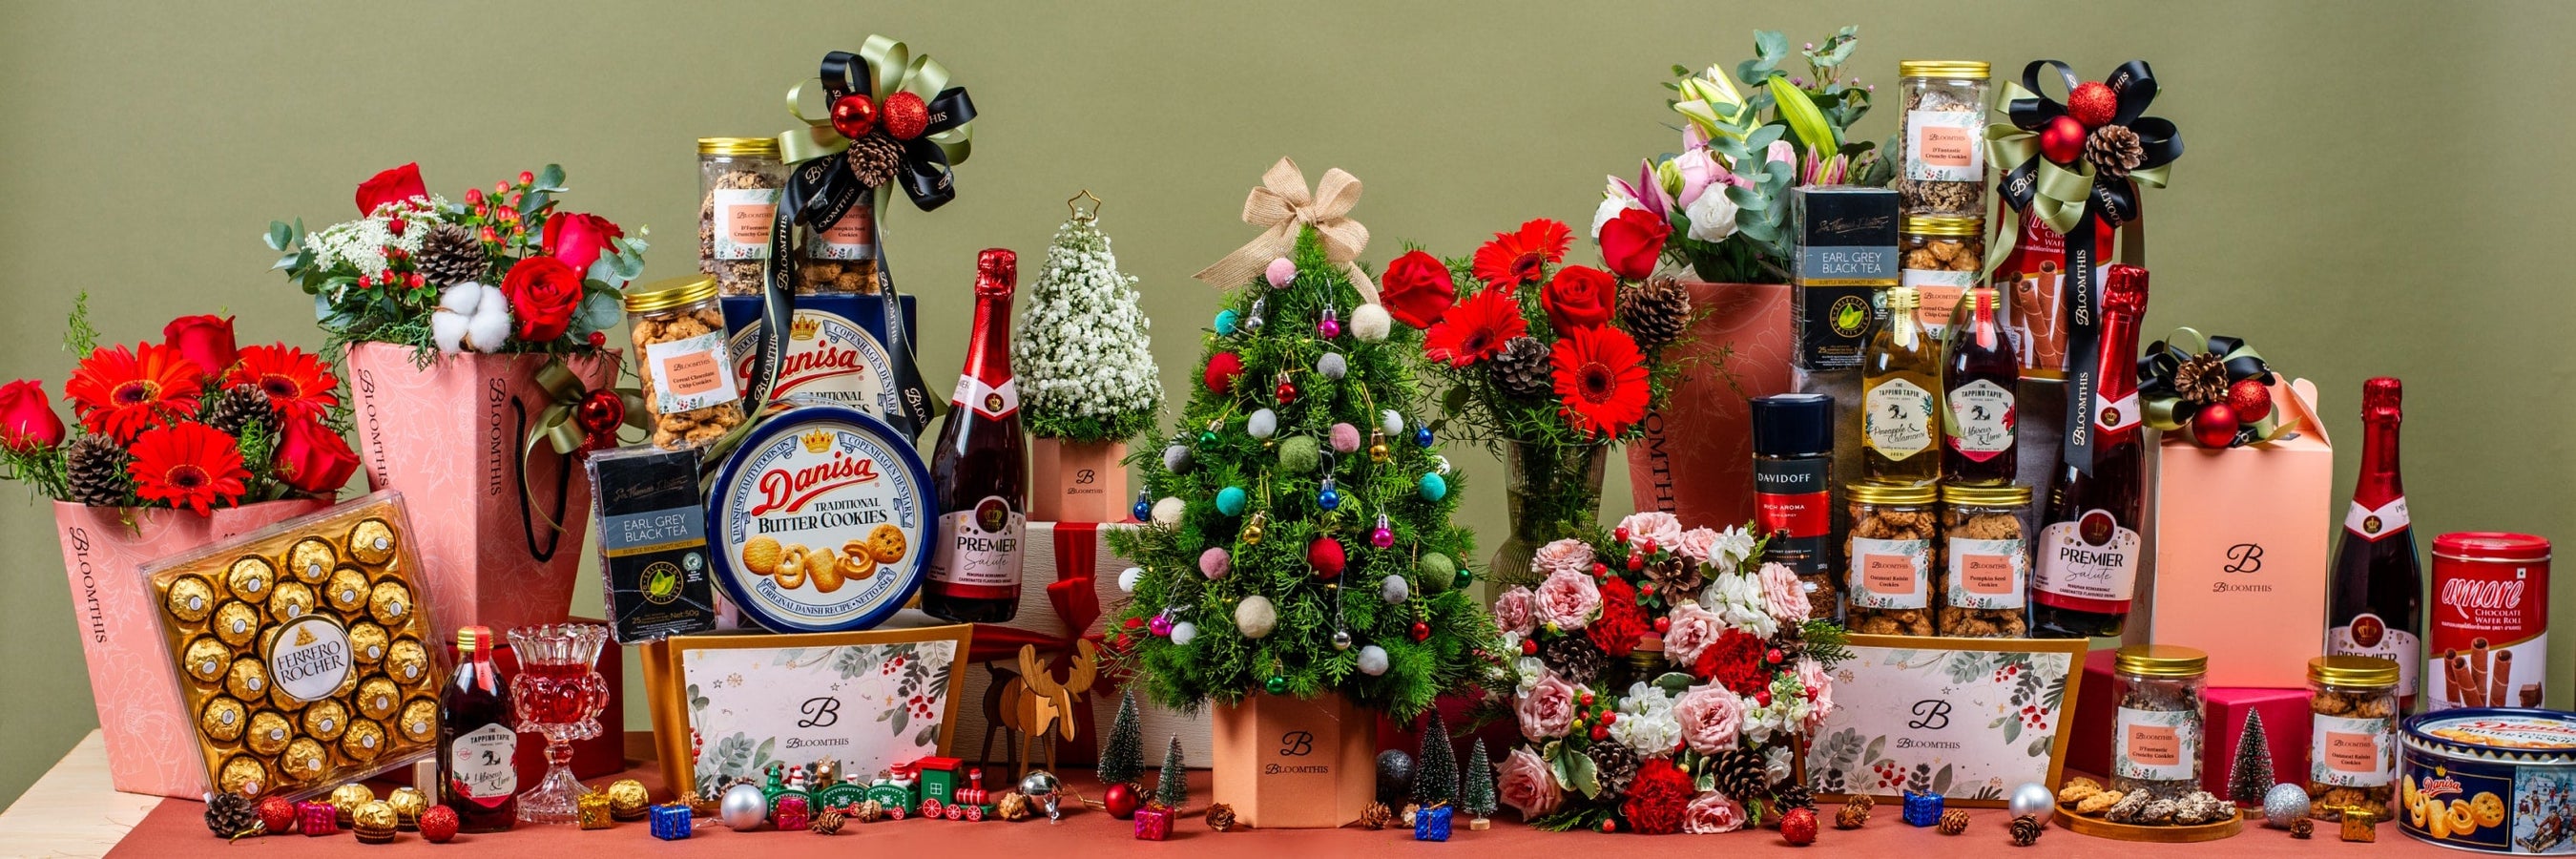 bloomthis-christmas-flowers-gifts